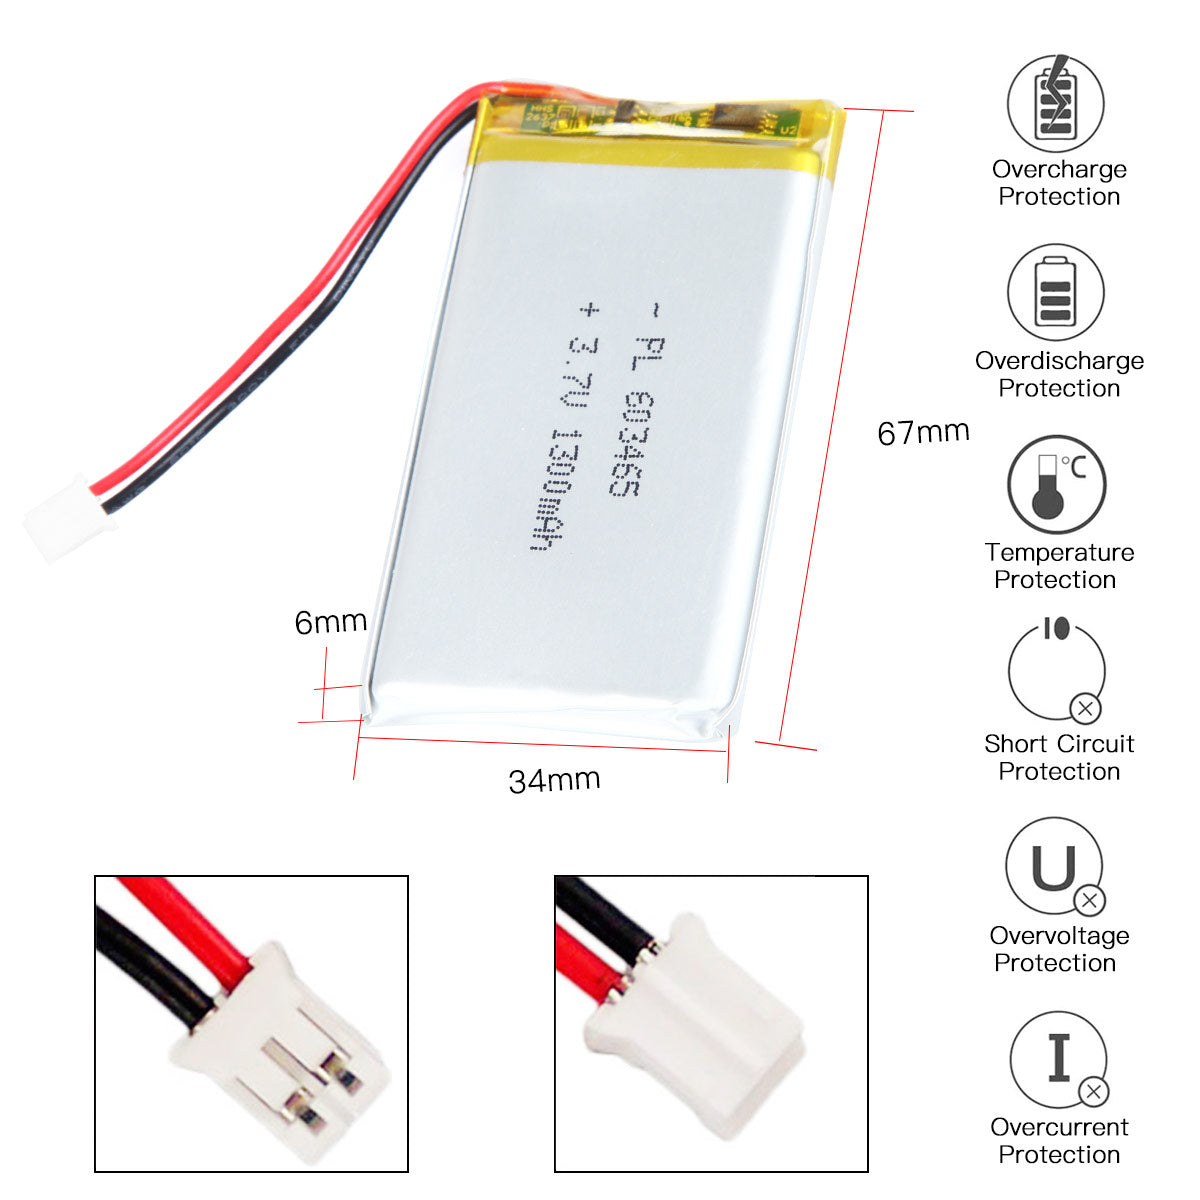 YDL 3.7V 1300mAh 603465 Rechargeable Lithium Polymer Battery